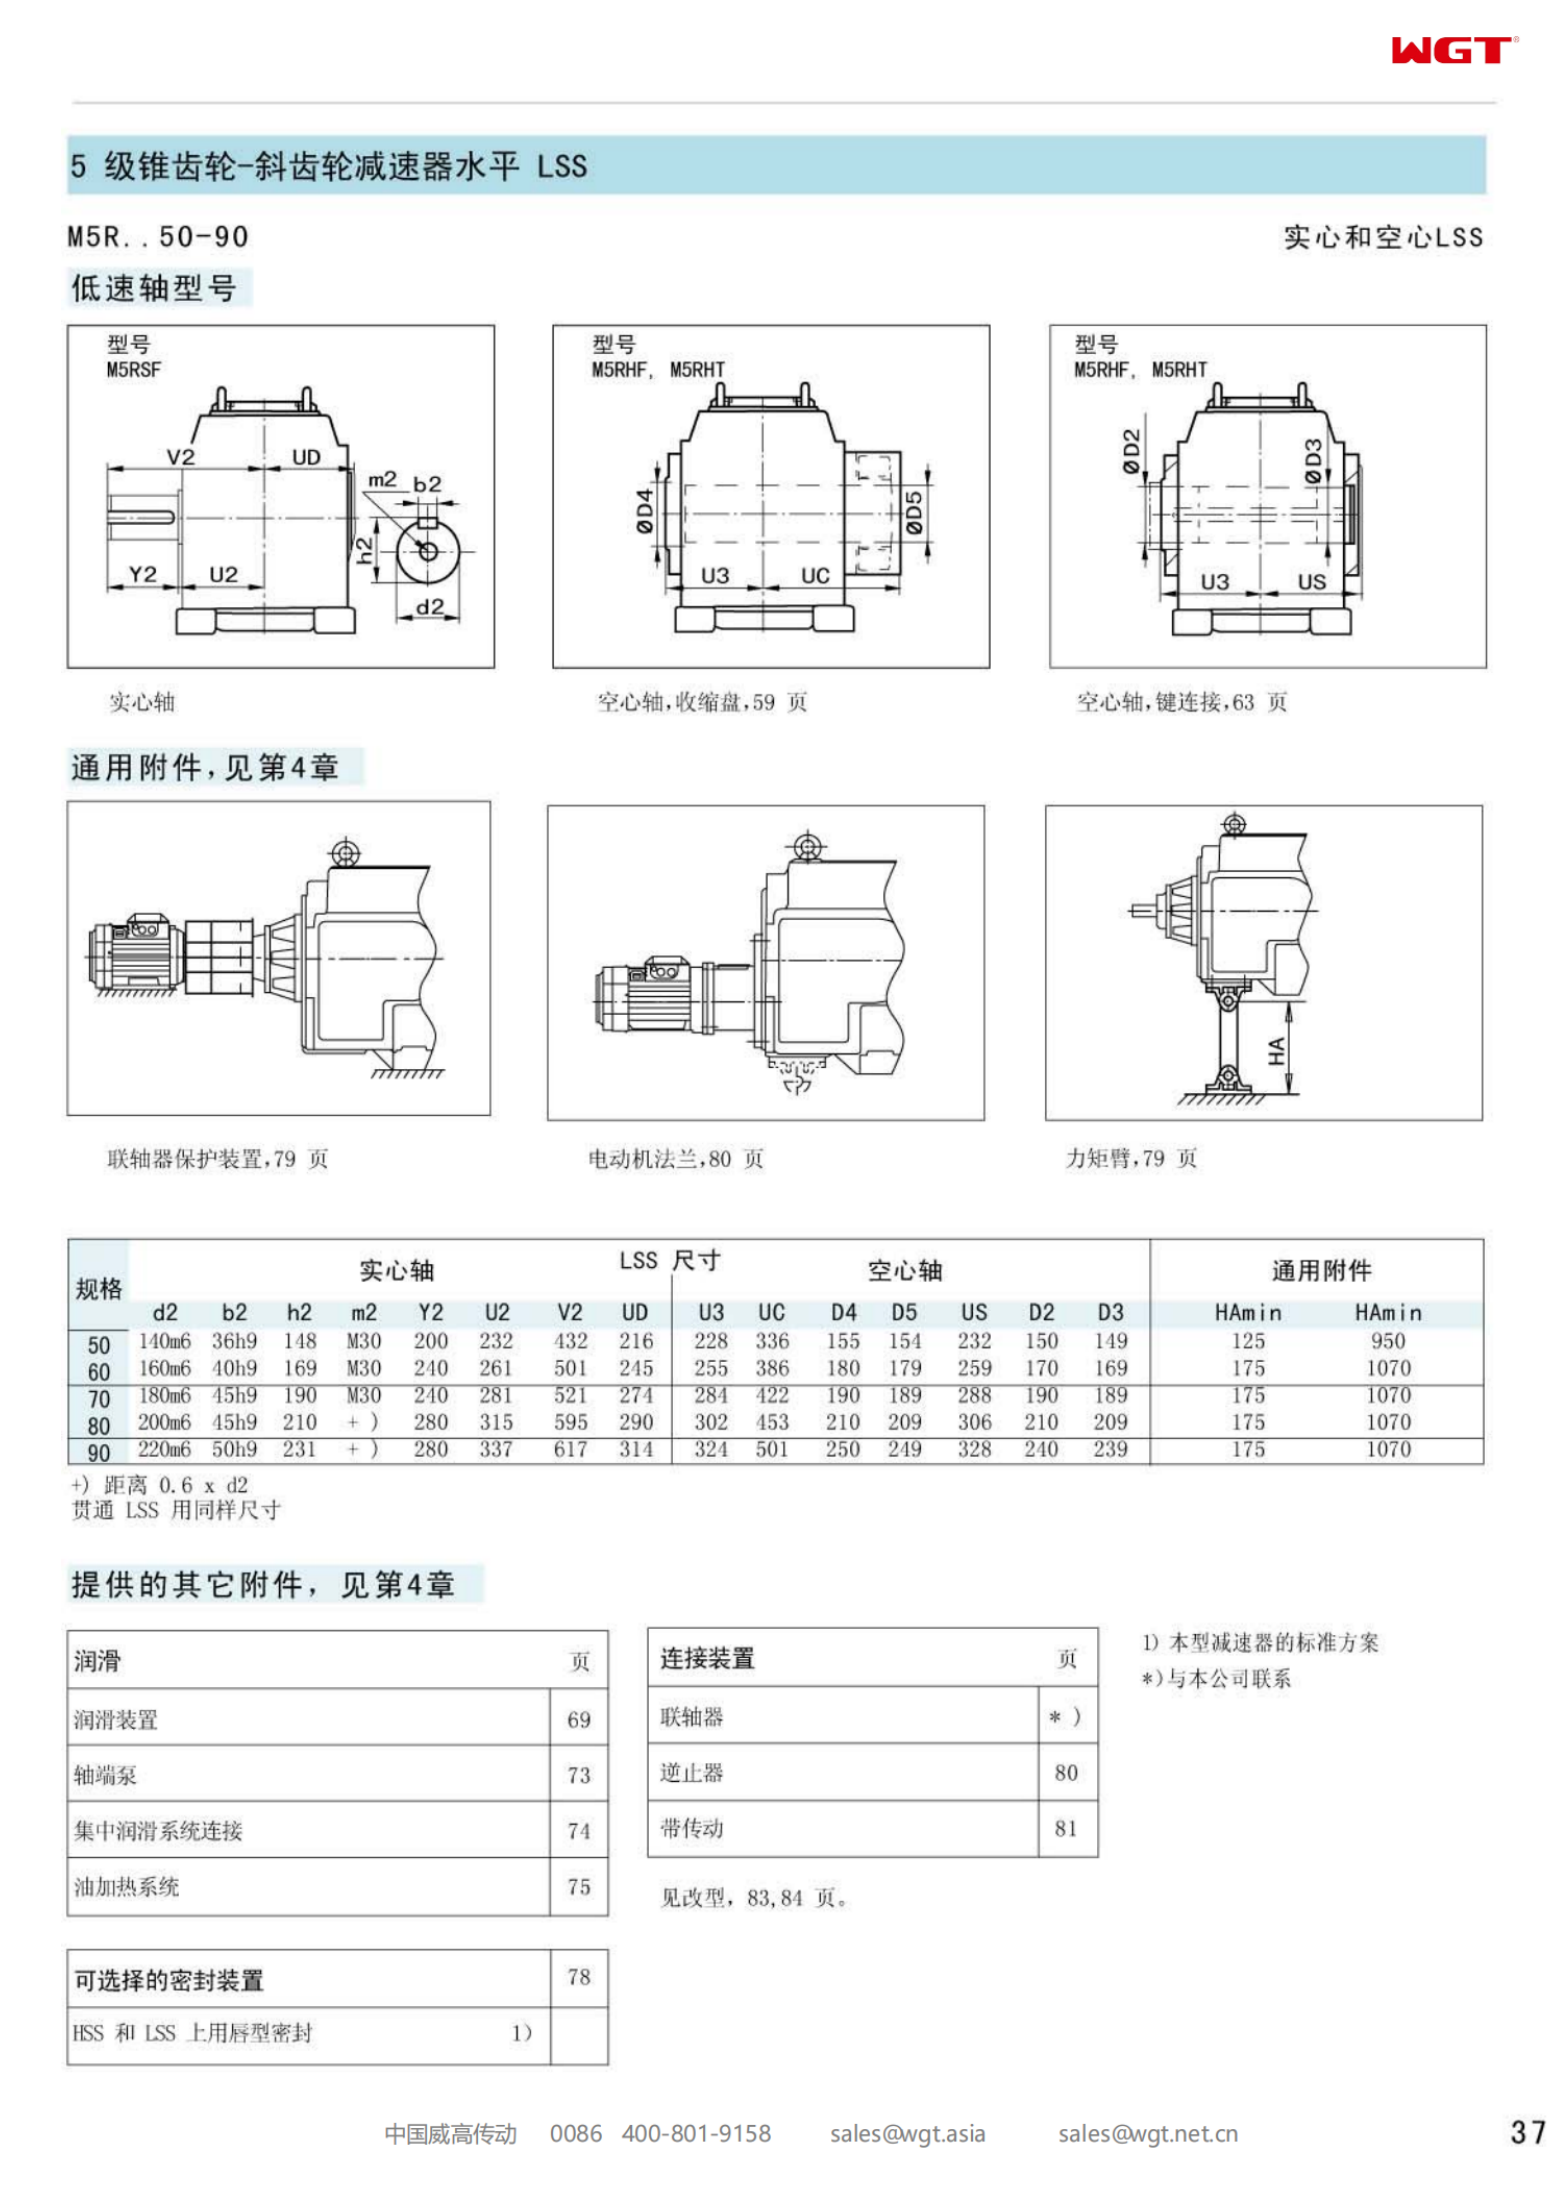 M2PVHF30 Replace_SEW_M_Series Gearbox